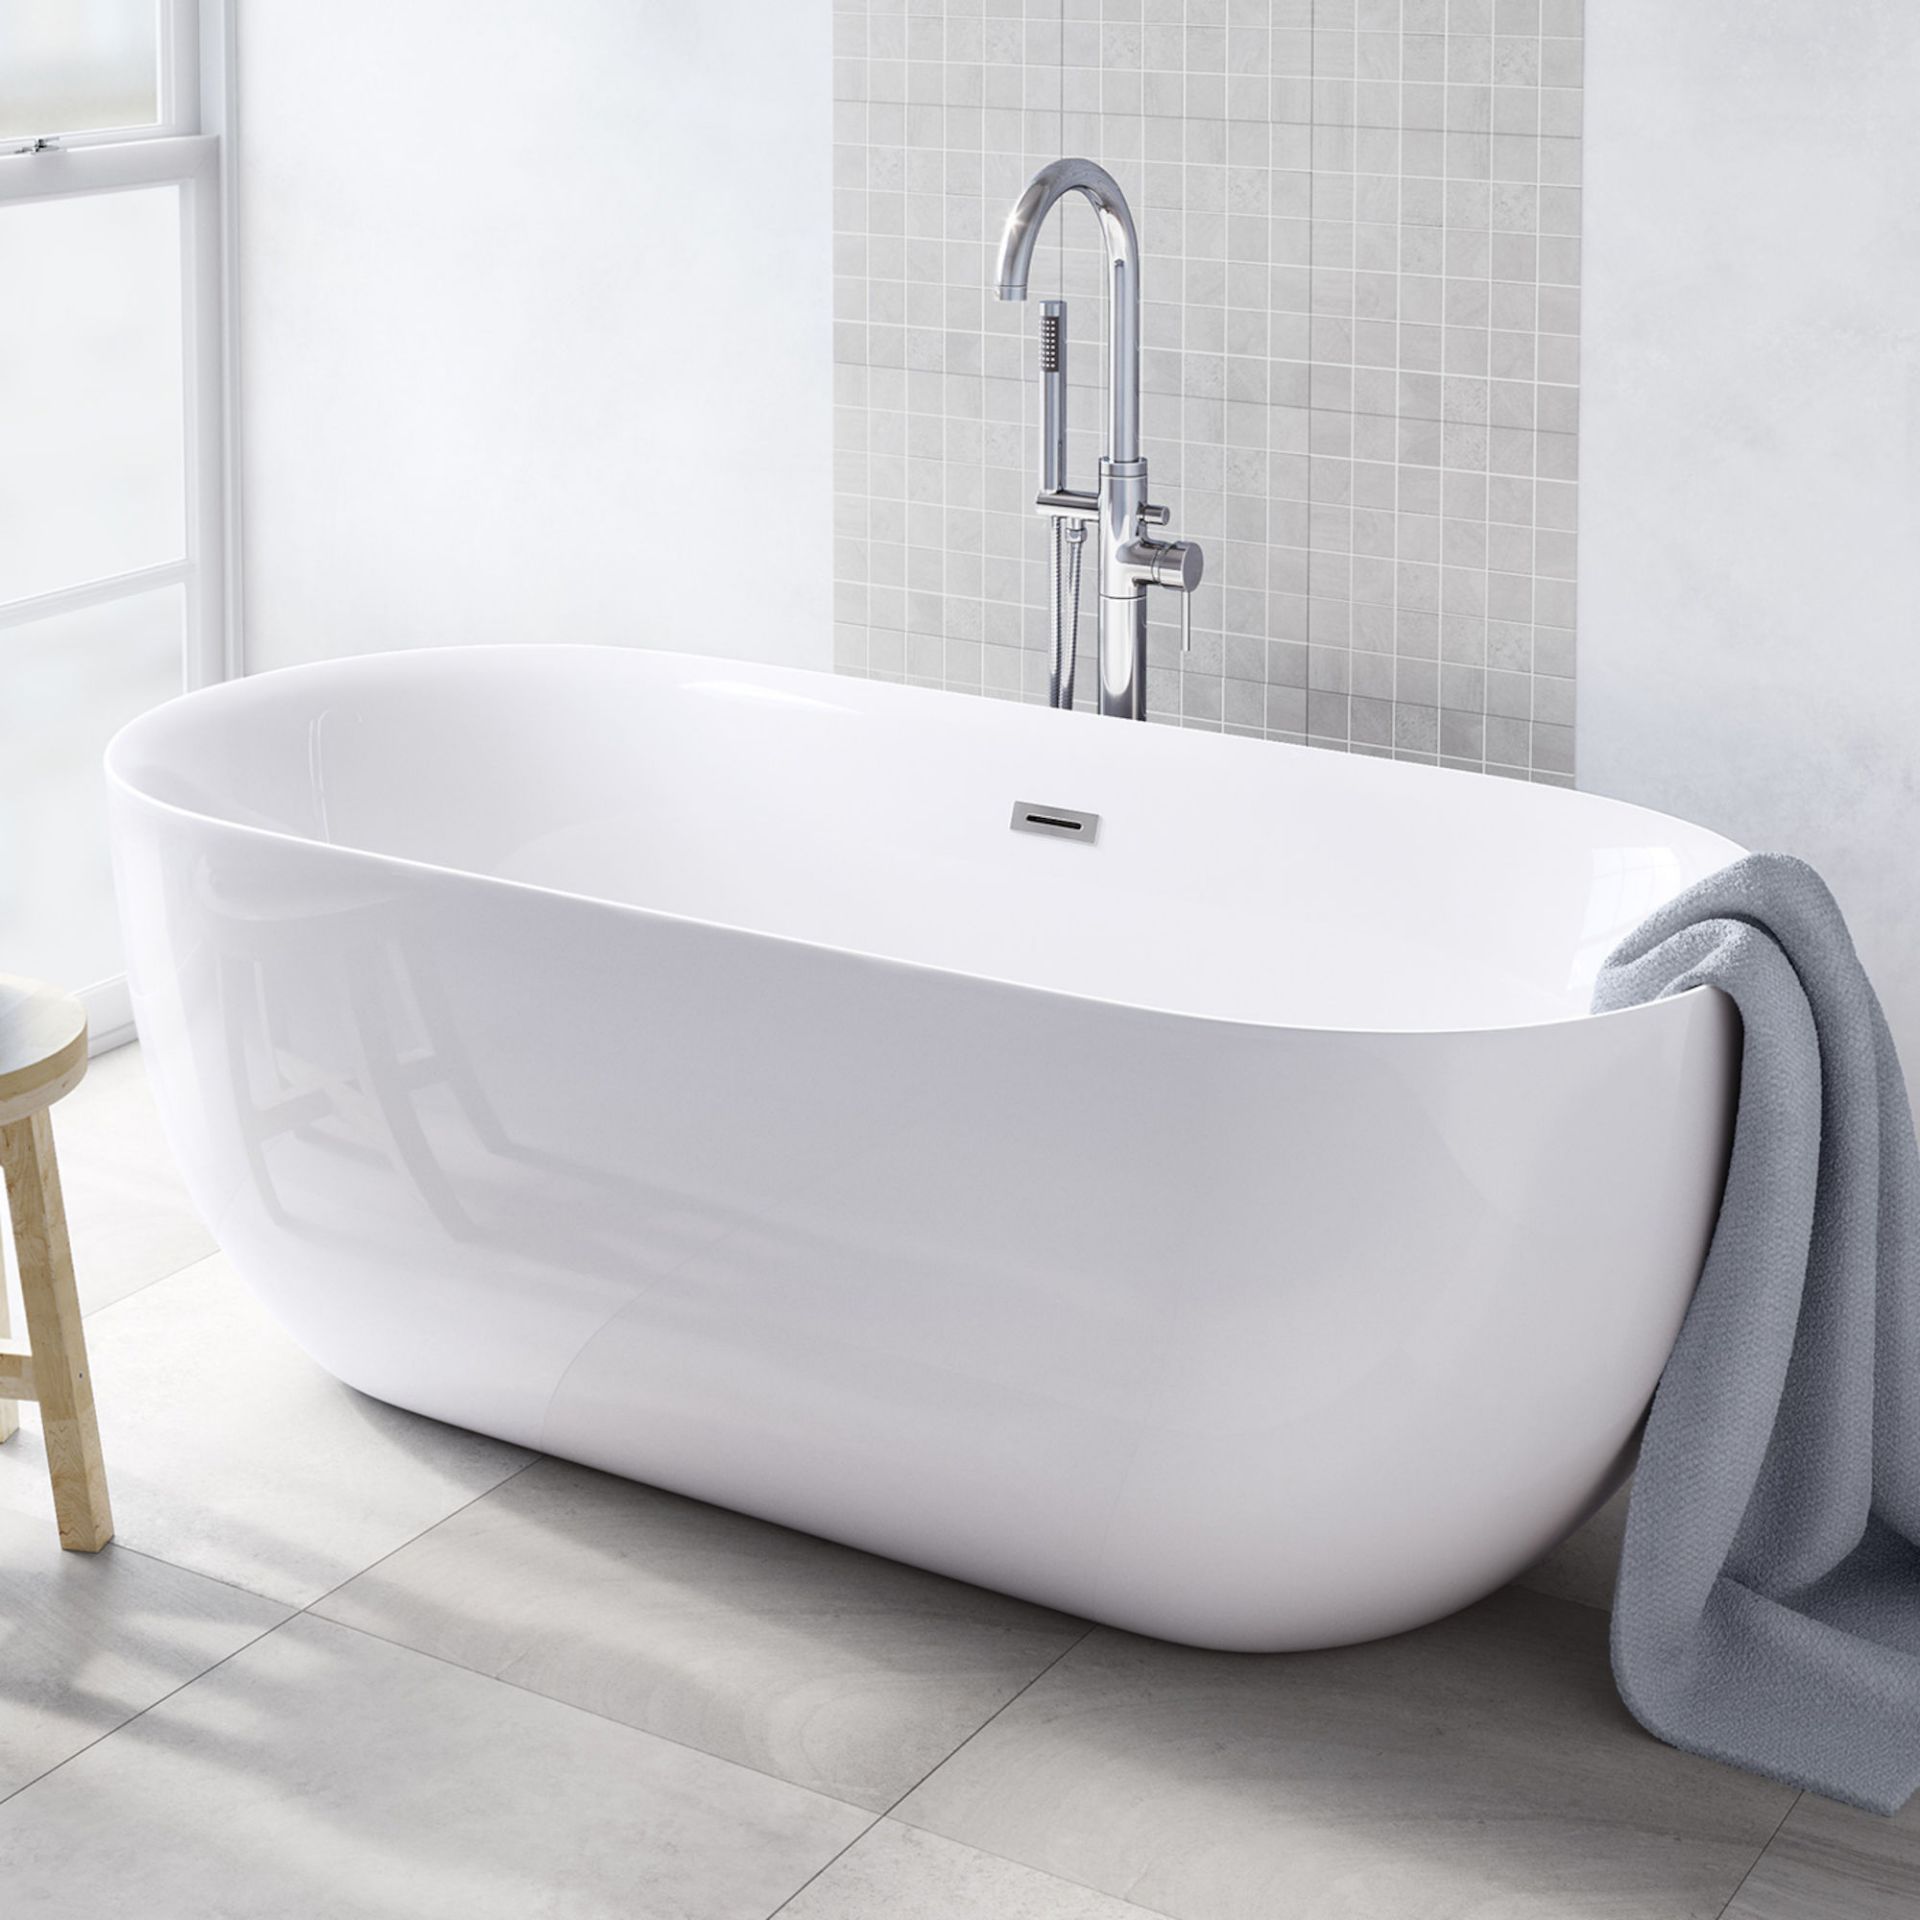 (OS96) 1700mmx780mm Mya Freestanding Bath. Showcasing style charm for a centre piece that's full